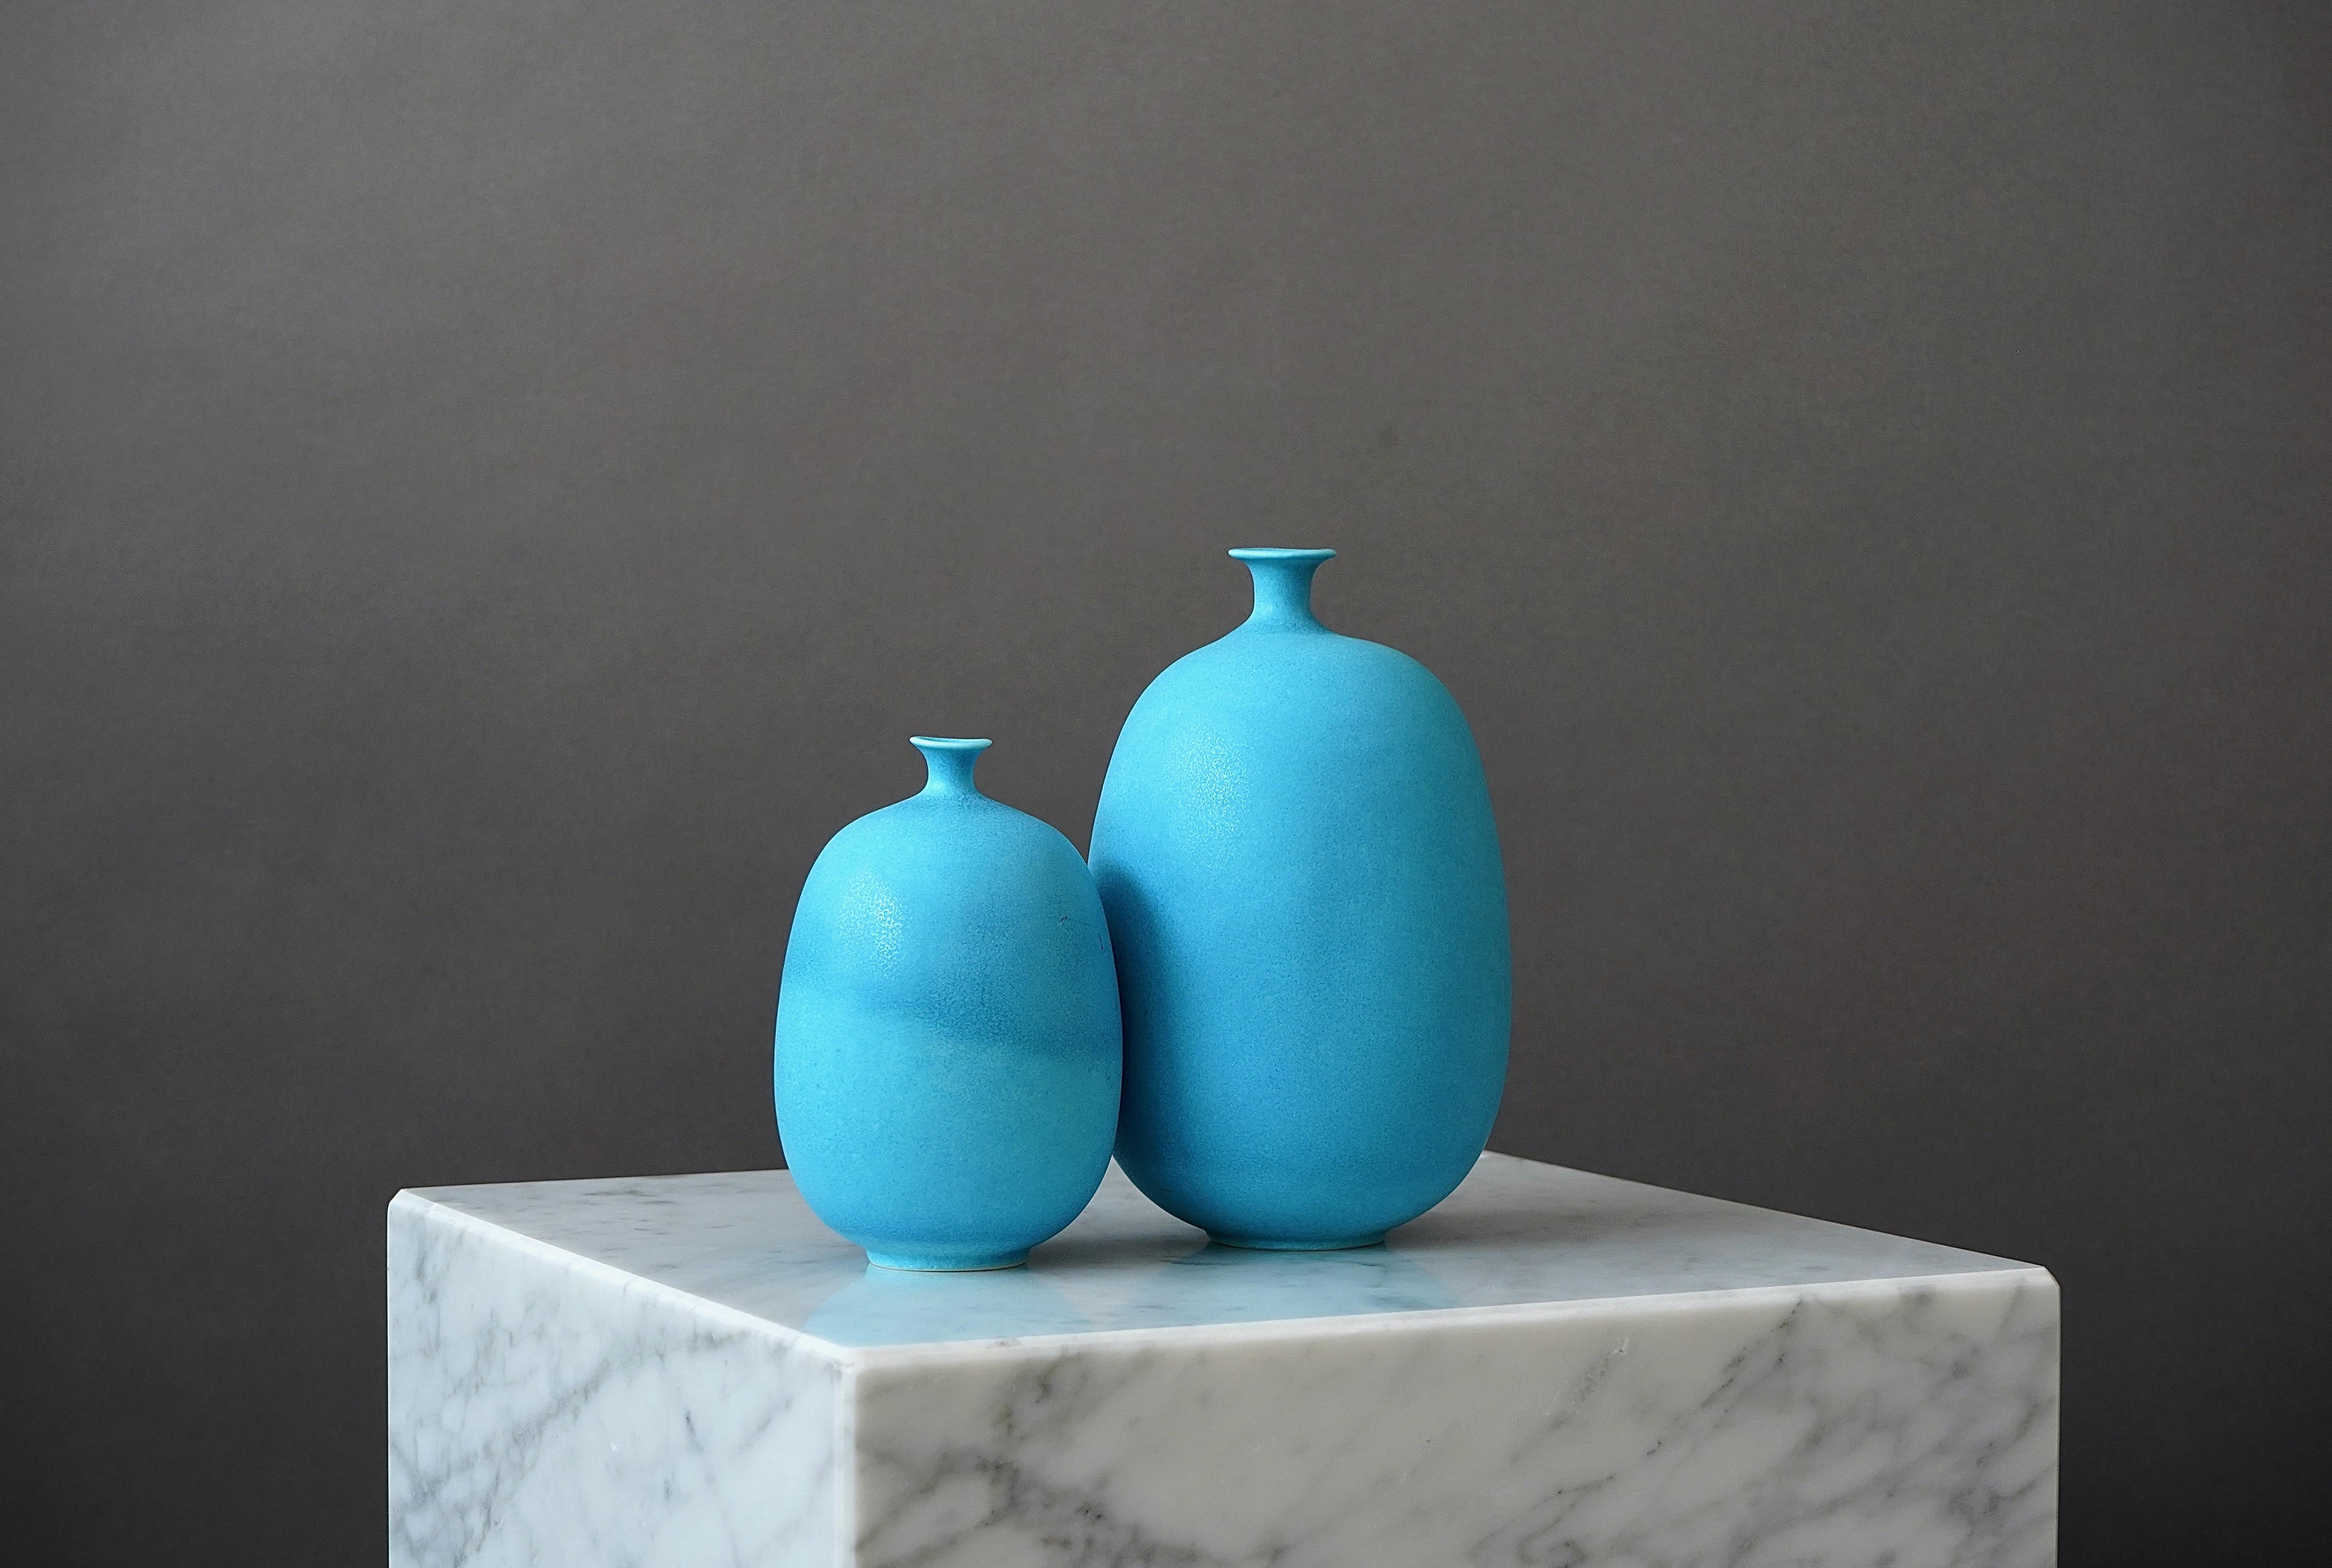 Swedish Set of 2 stoneware 'Balloon' Vases by Inger Persson, Rorstrand, Sweden, 1980s